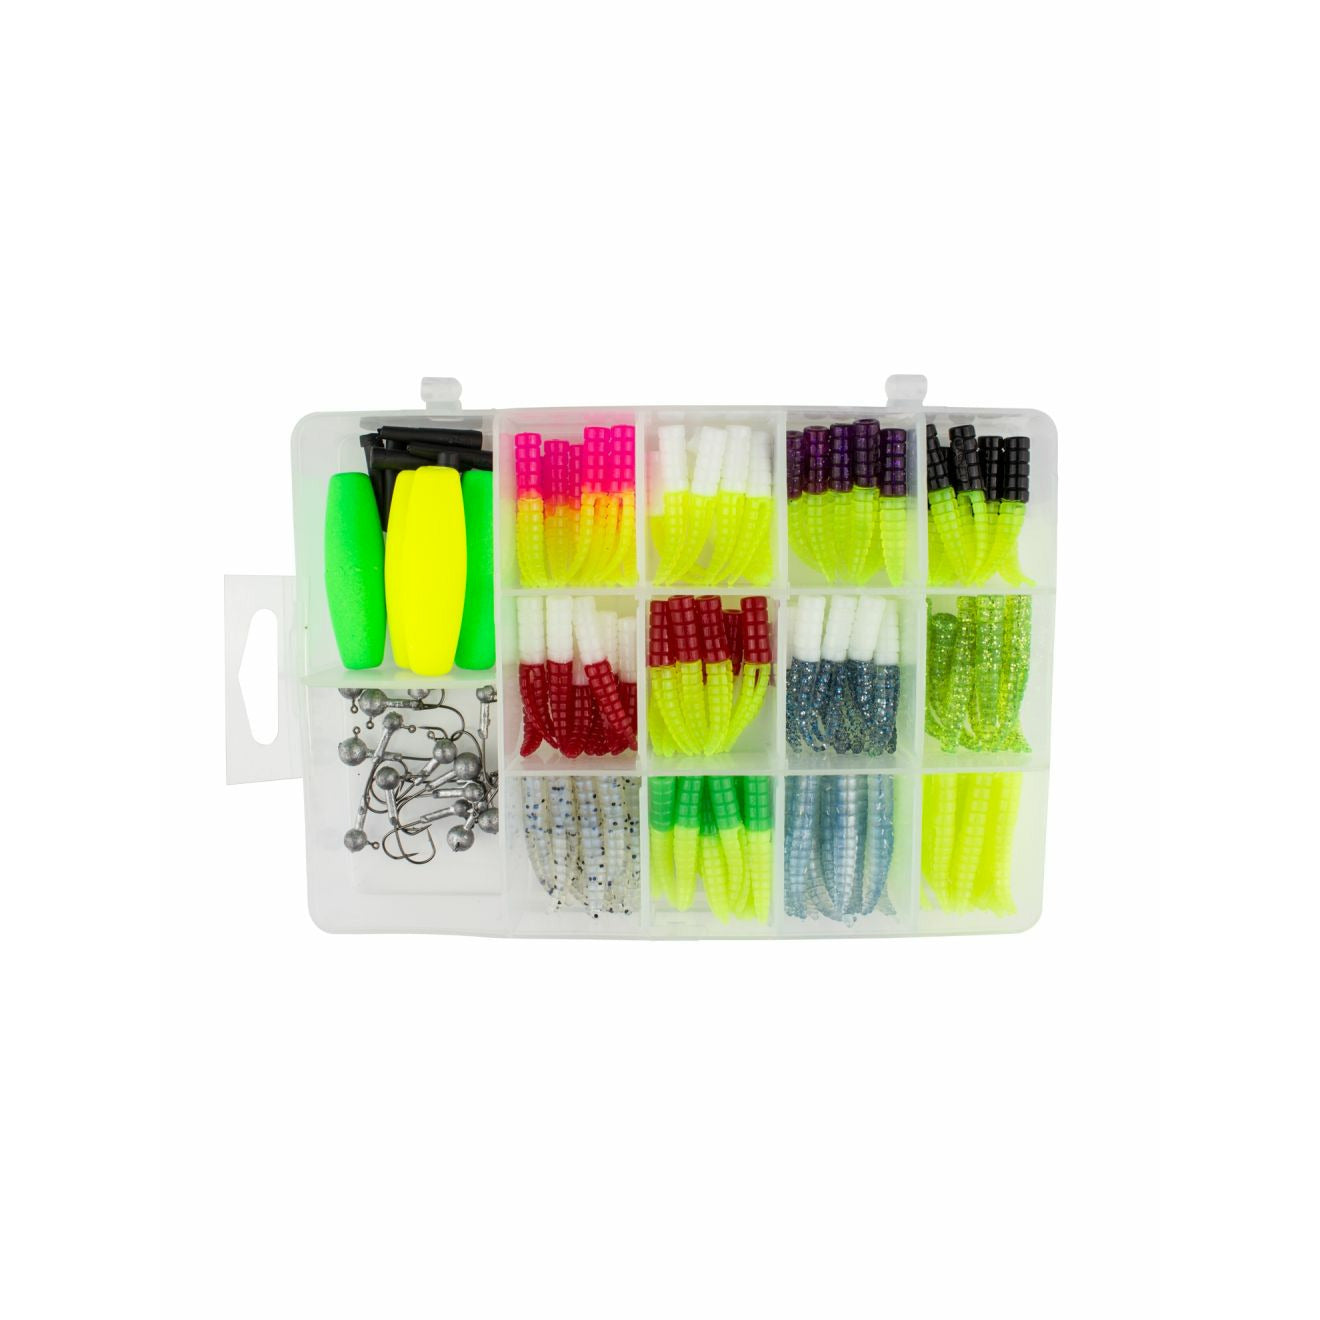 Crappie Magnet Best of The Best Kit, Fishing Equipment and